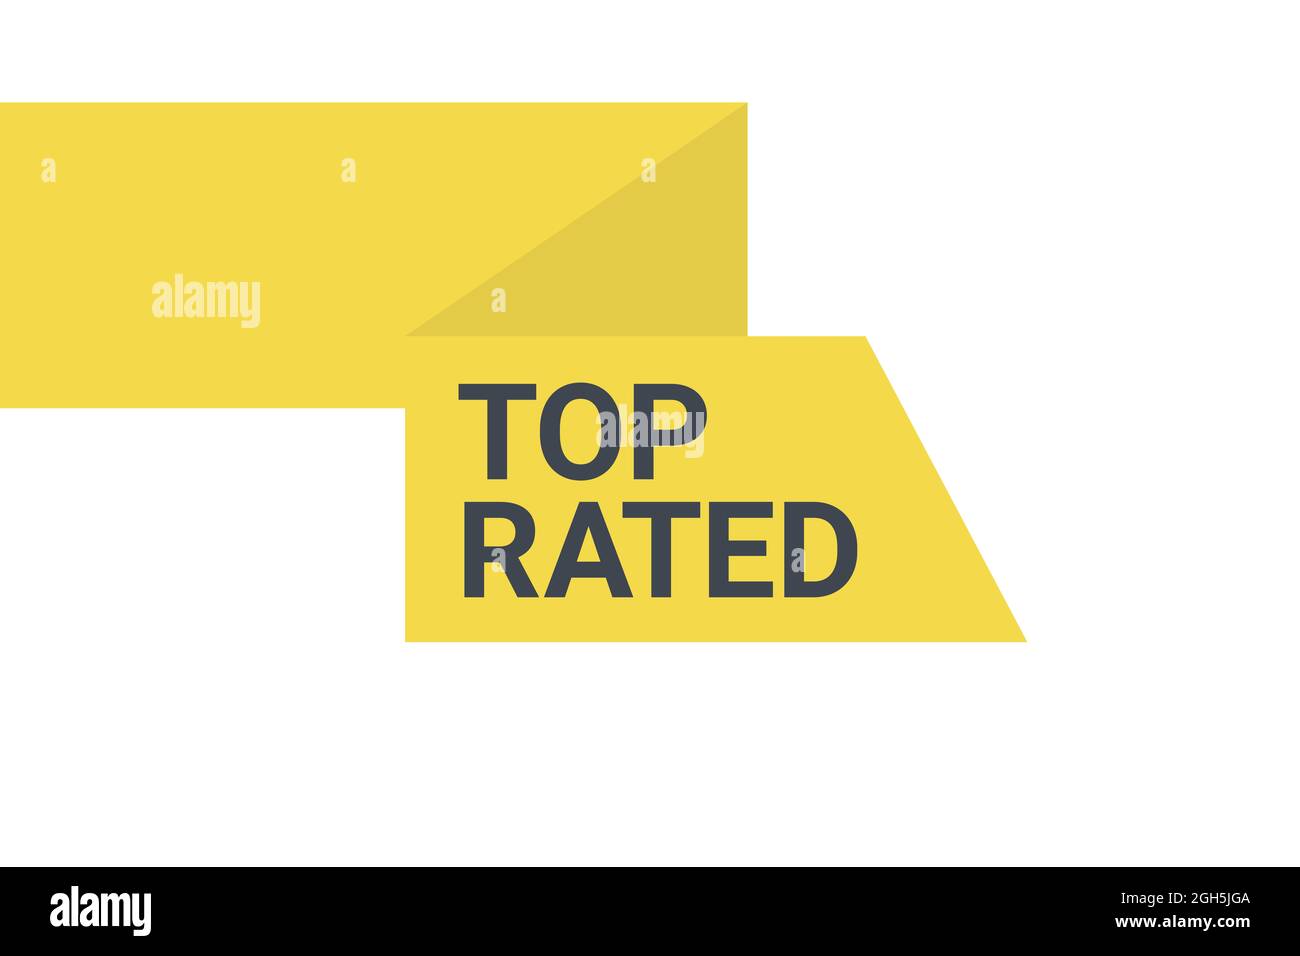 Modern, vibrant, urban graphic design of a banner saying 'Top Rated' in yellow and grey colors. Simple, bold graphic vector art. Stock Photo